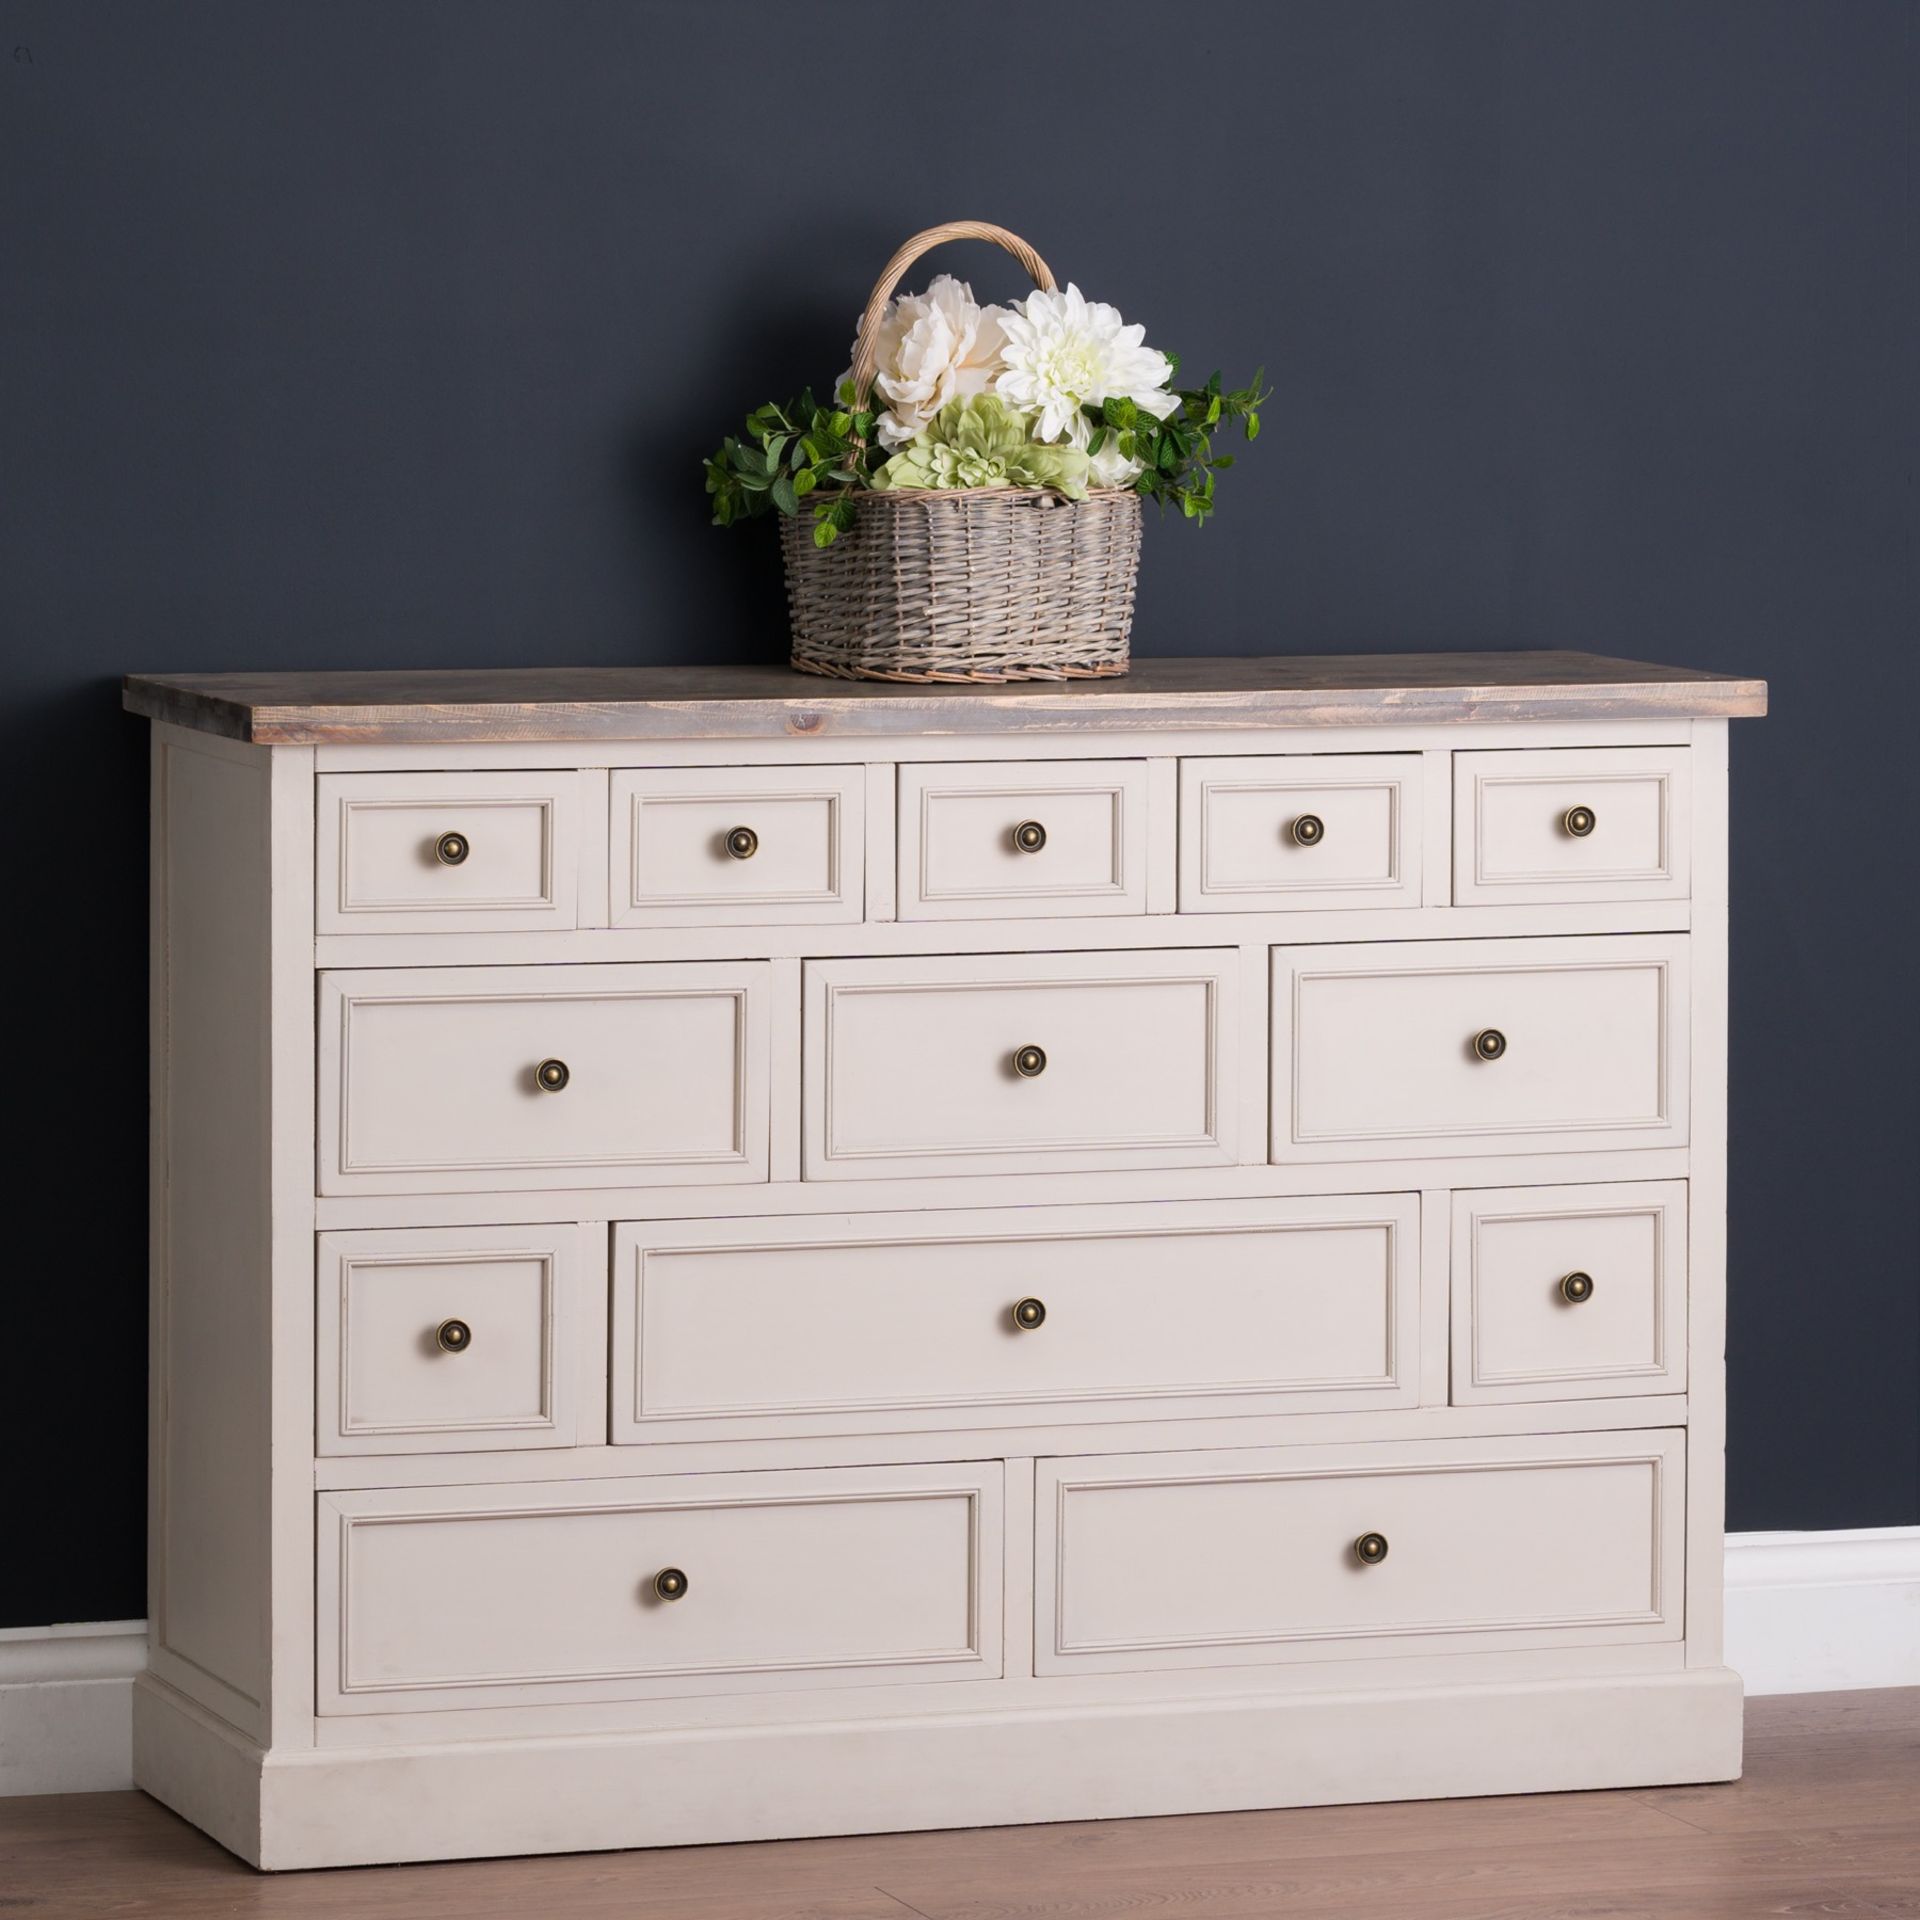 Avon Country Manor Collection 13 Drawer Chest This Sturdy And Weighty 13 Drawer Chest Is Part Of